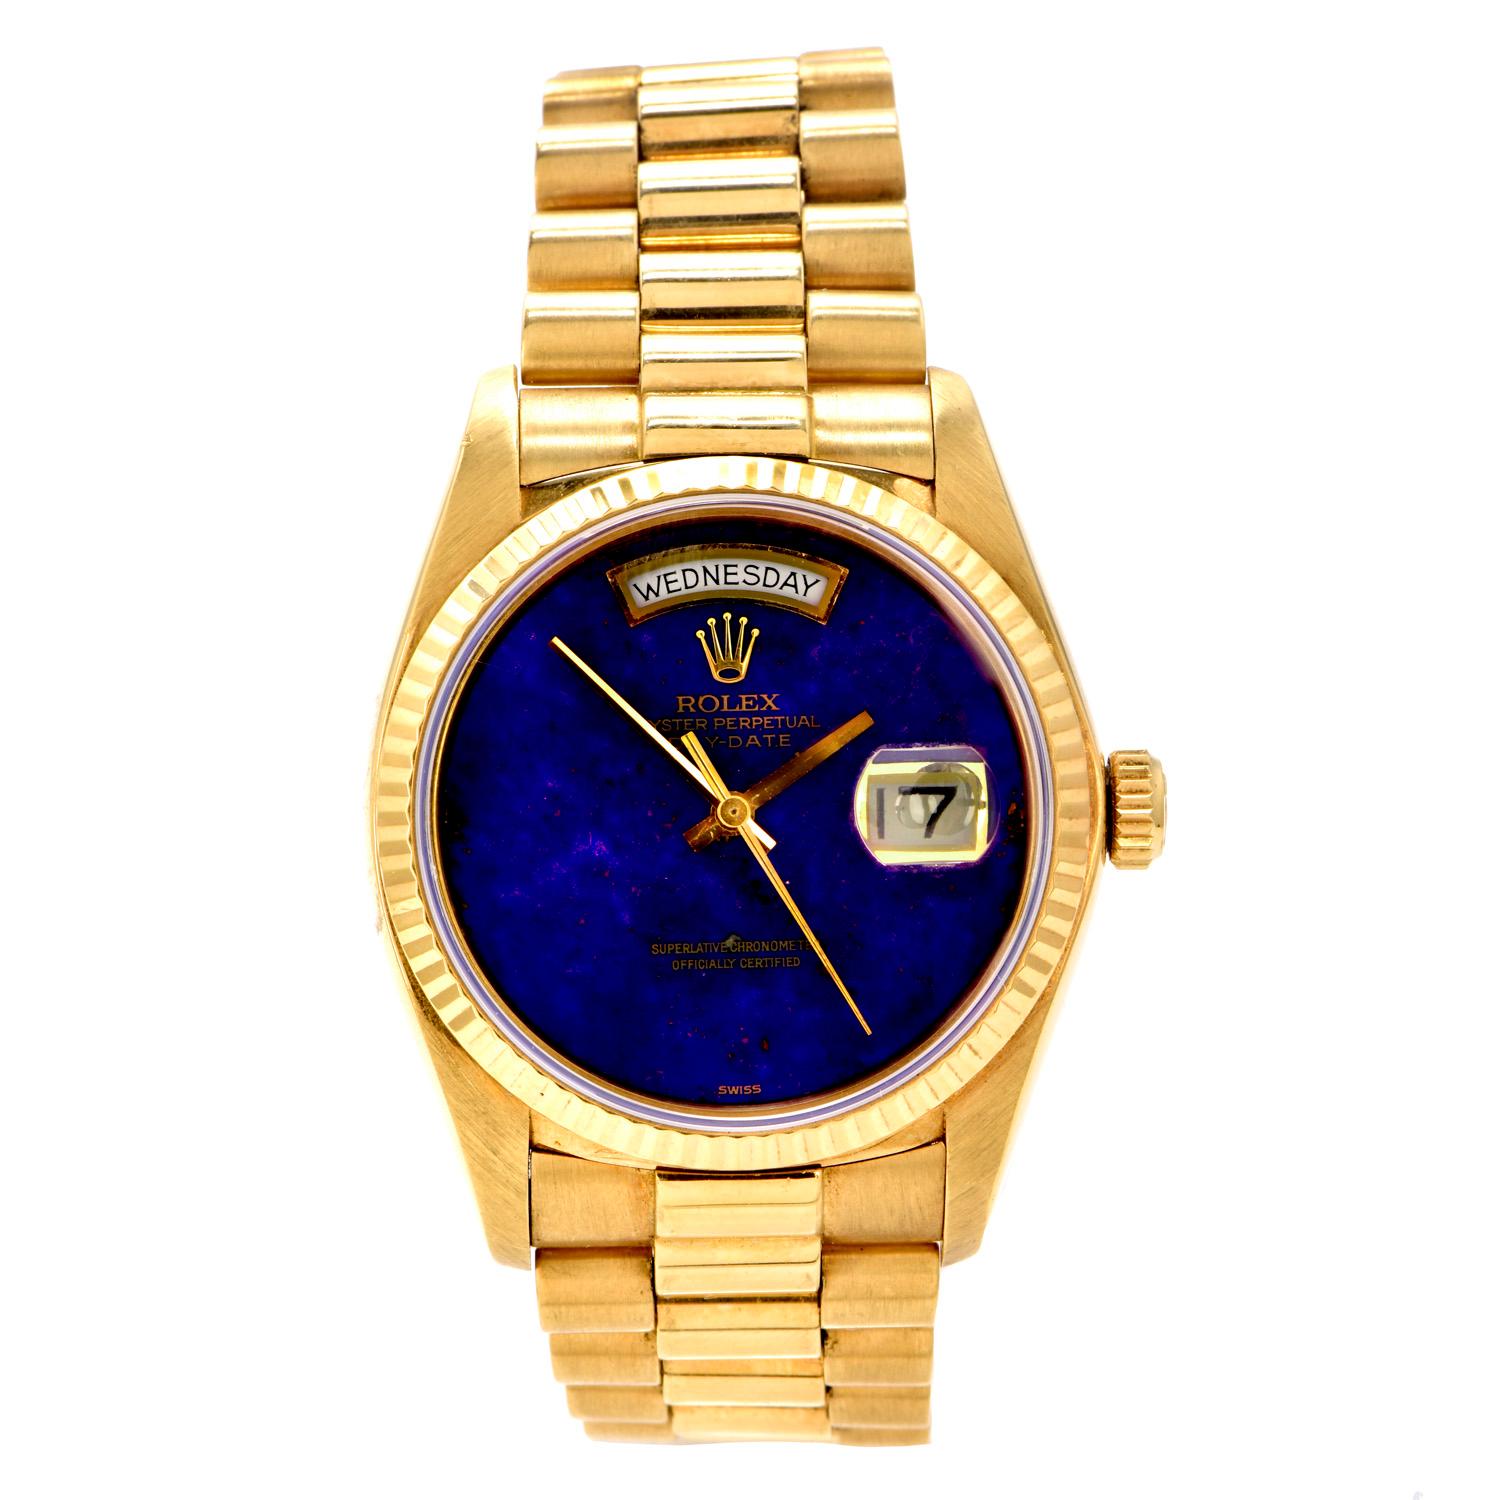 Handsome, Vintage Gentlemen’s Rolex President Day-Date watch, Ref 18038

dated from the LAte 1980s.

It is crafted in 18k yellow gold.

Featuring All Original scratch-resistant Sapphire Crystal, 

Rare Desirable Genuine Lapis Dial, gold hands, day